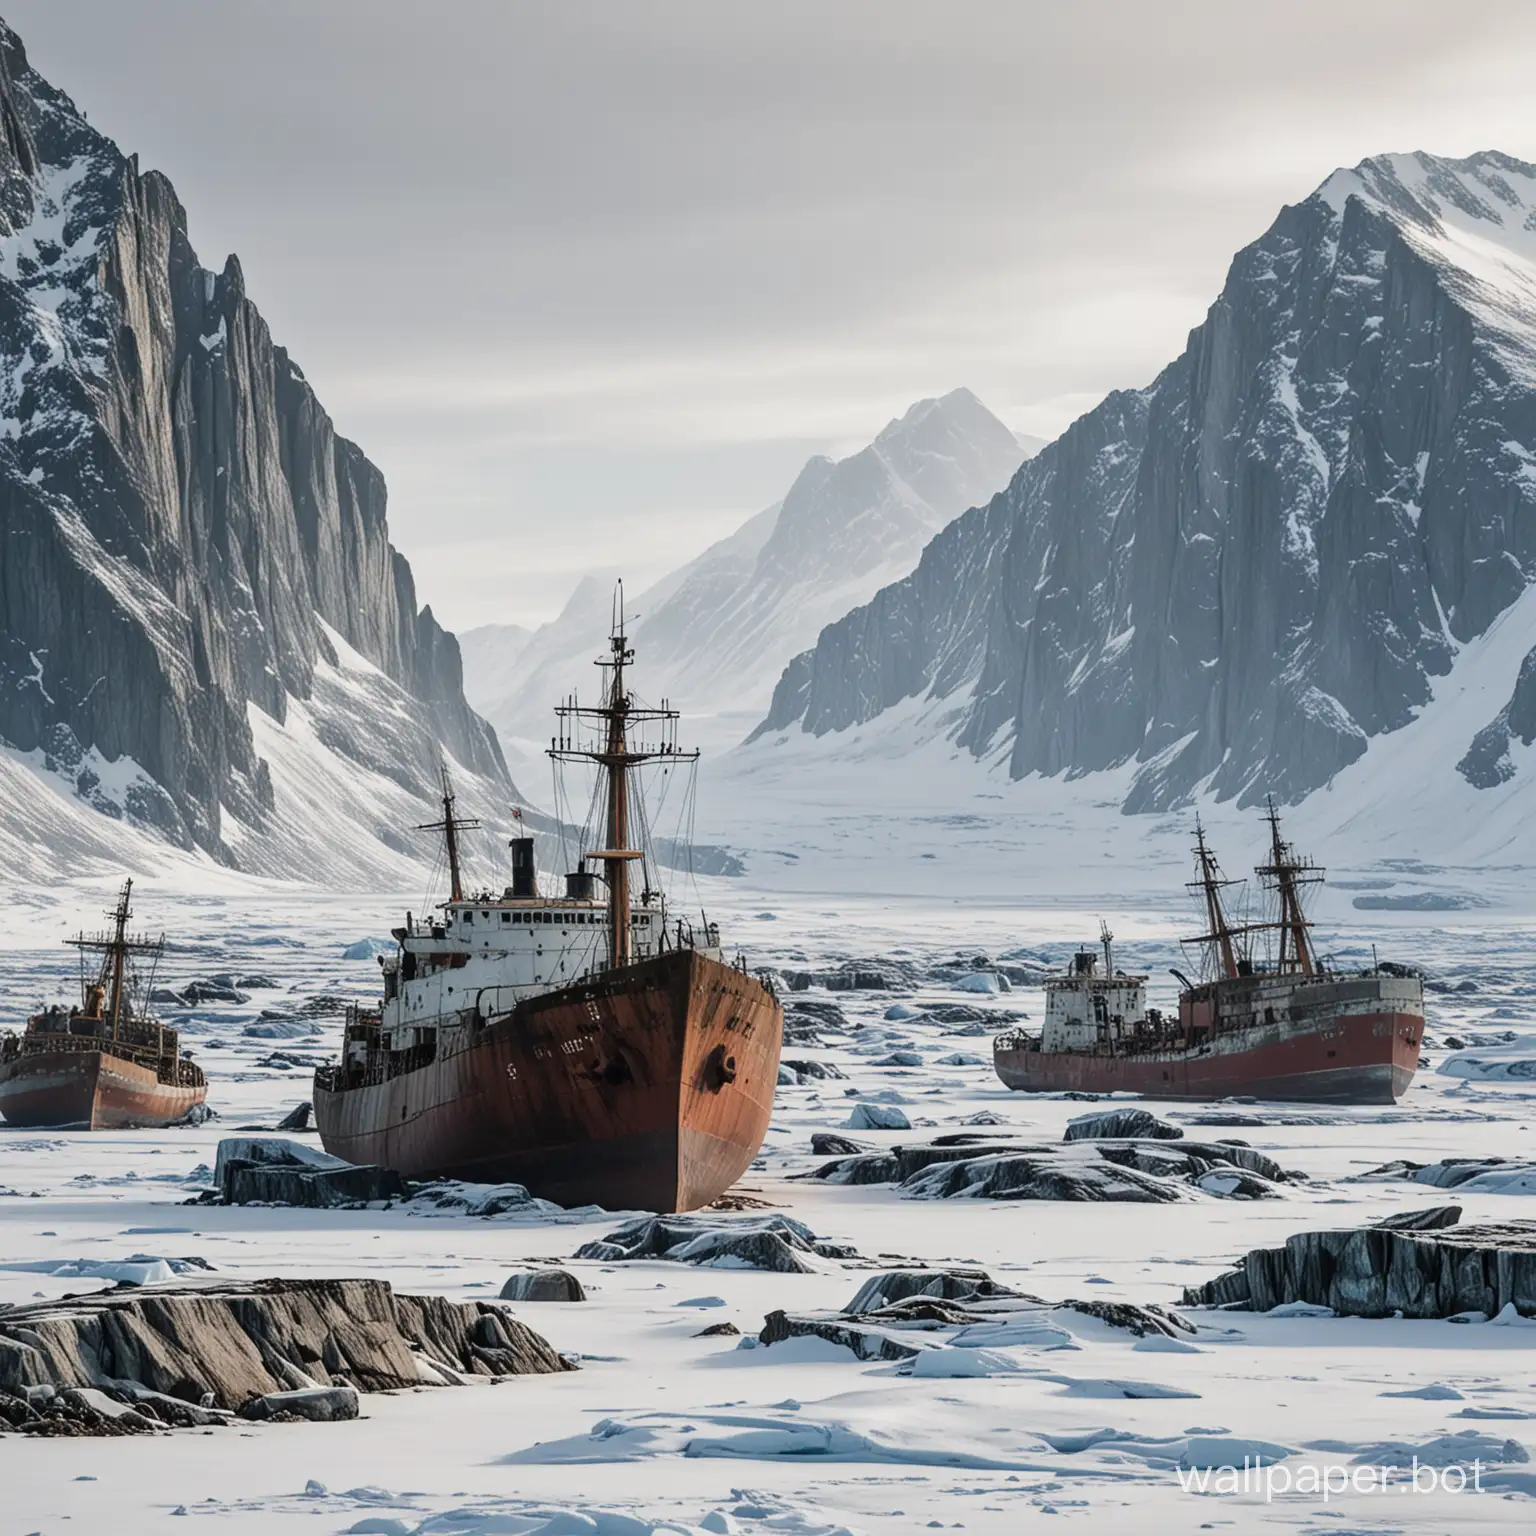 Frozen-Shipgraveyard-amidst-Towering-Arctic-Mountains